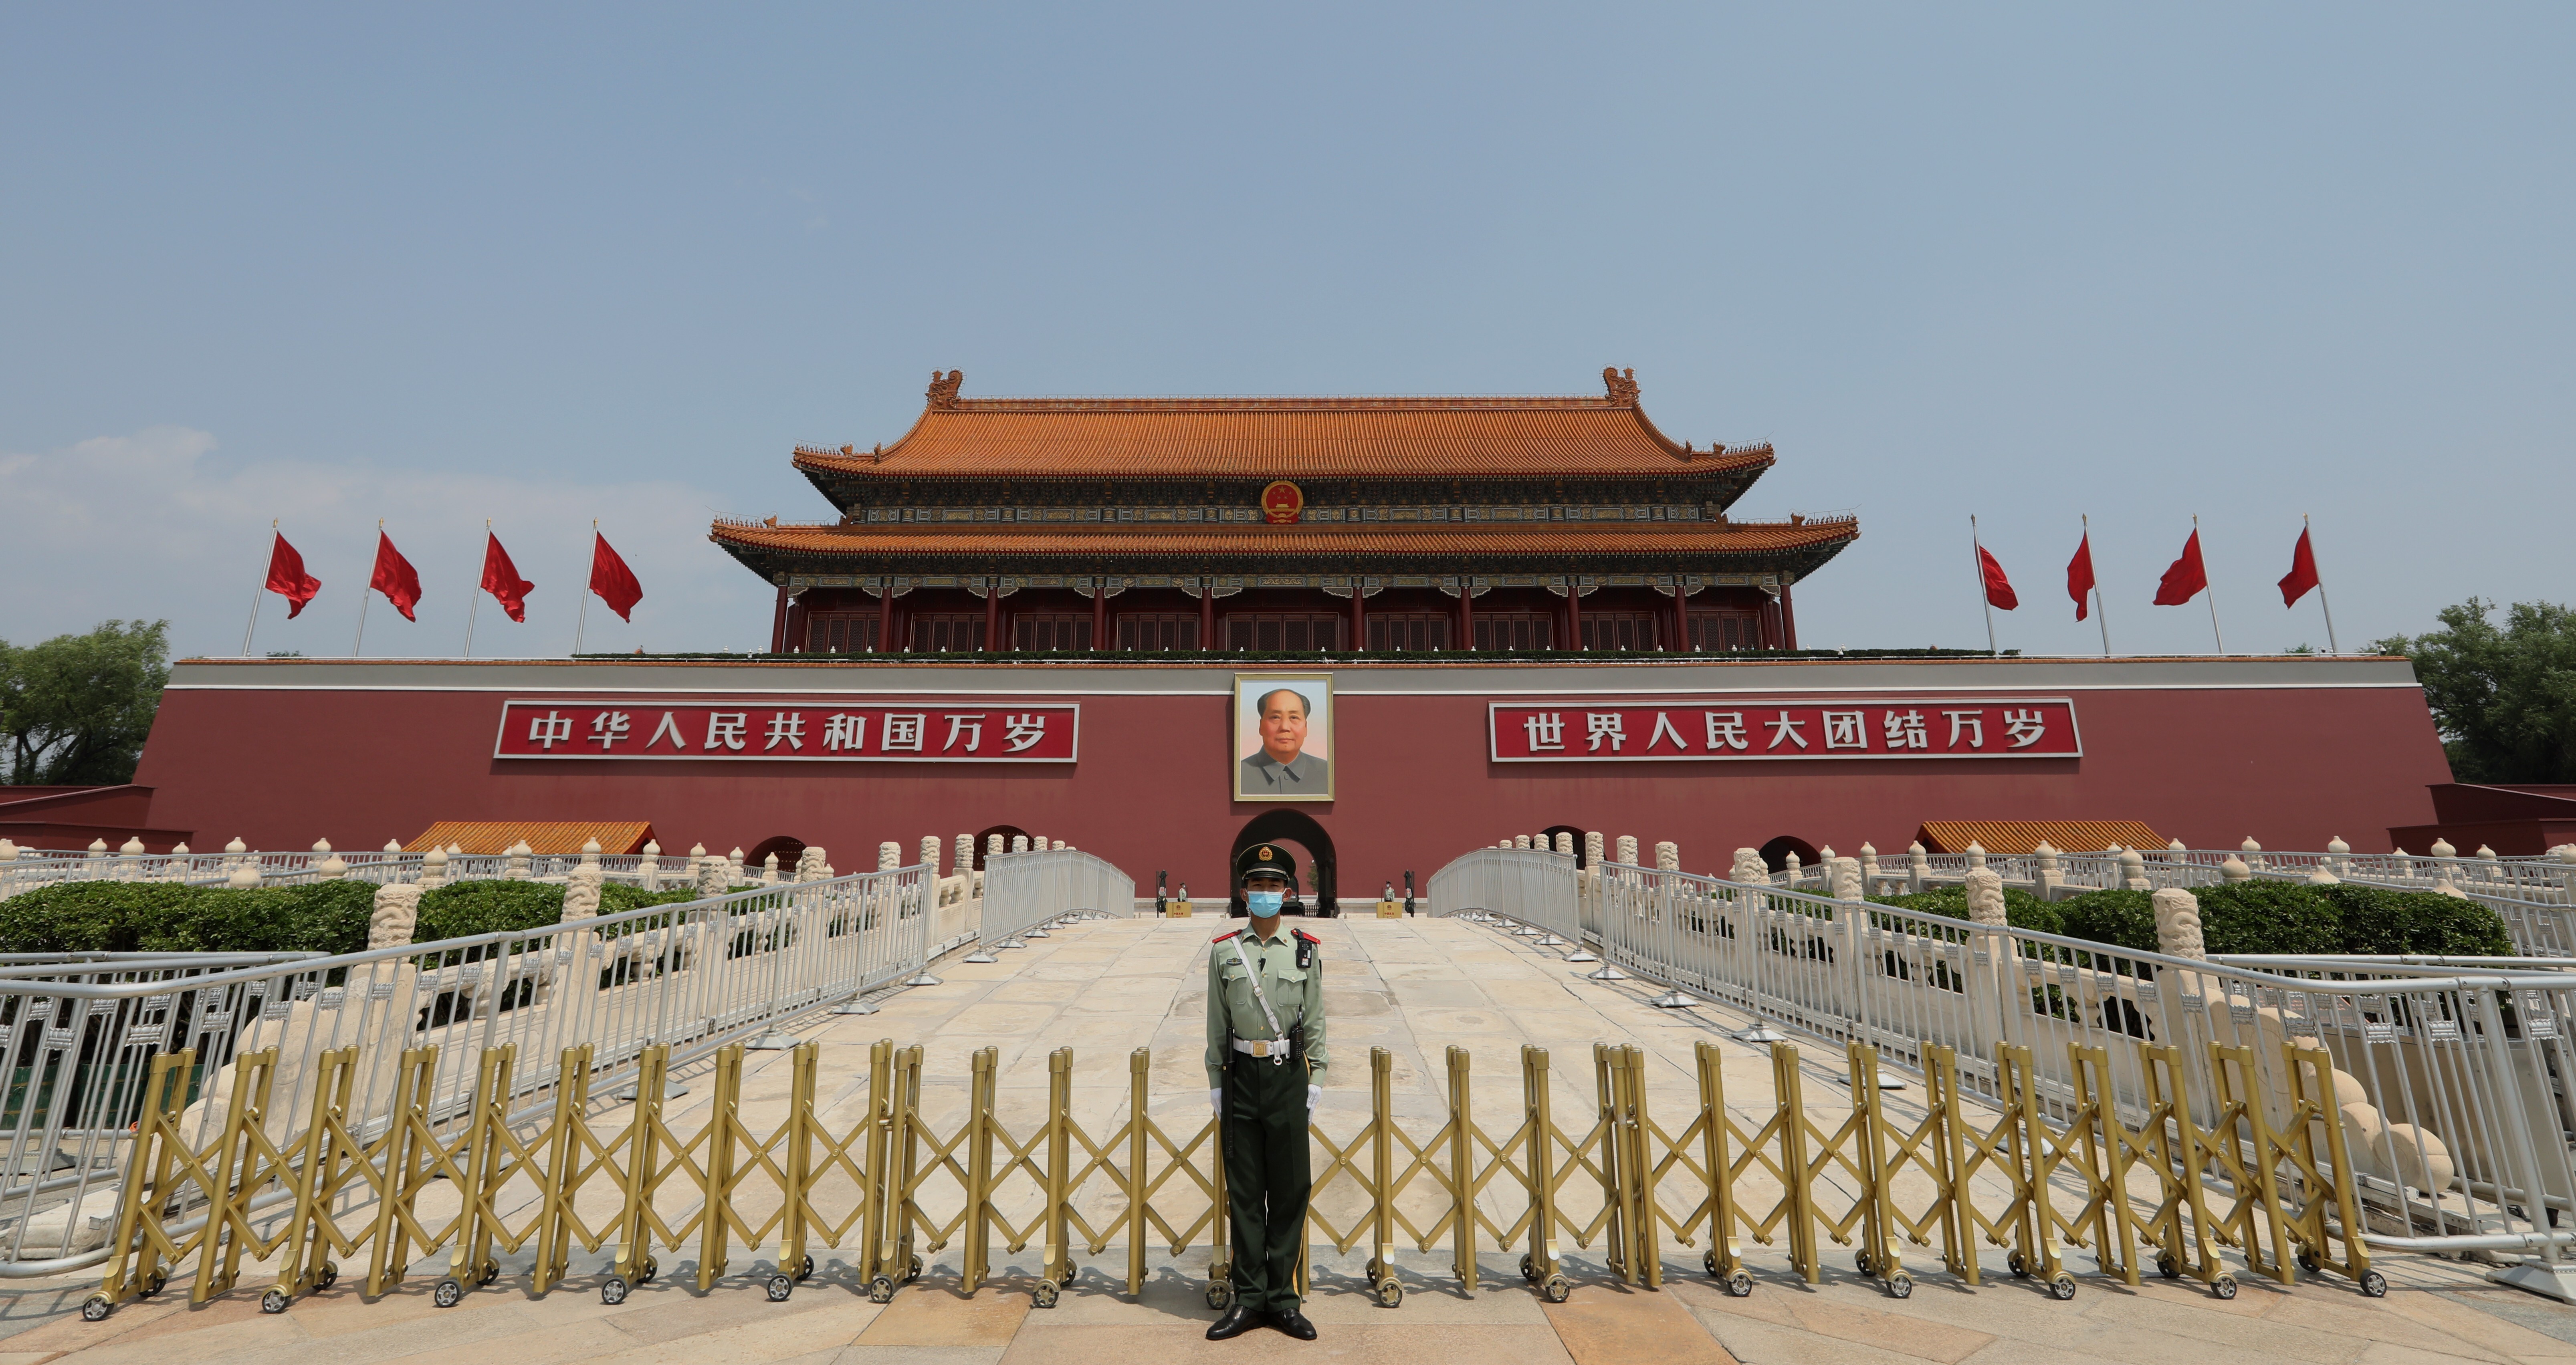 An armed policeman stands in front of the Tiananmen Rostrum in Beijing on May 22, the first day of the third session of the 13th National People’s Congress, China’s top legislative body. The central government submitted a resolution to the NPC to enable its standing committee to pass a new national security law tailor-made for Hong Kong. Photo: Simon Song